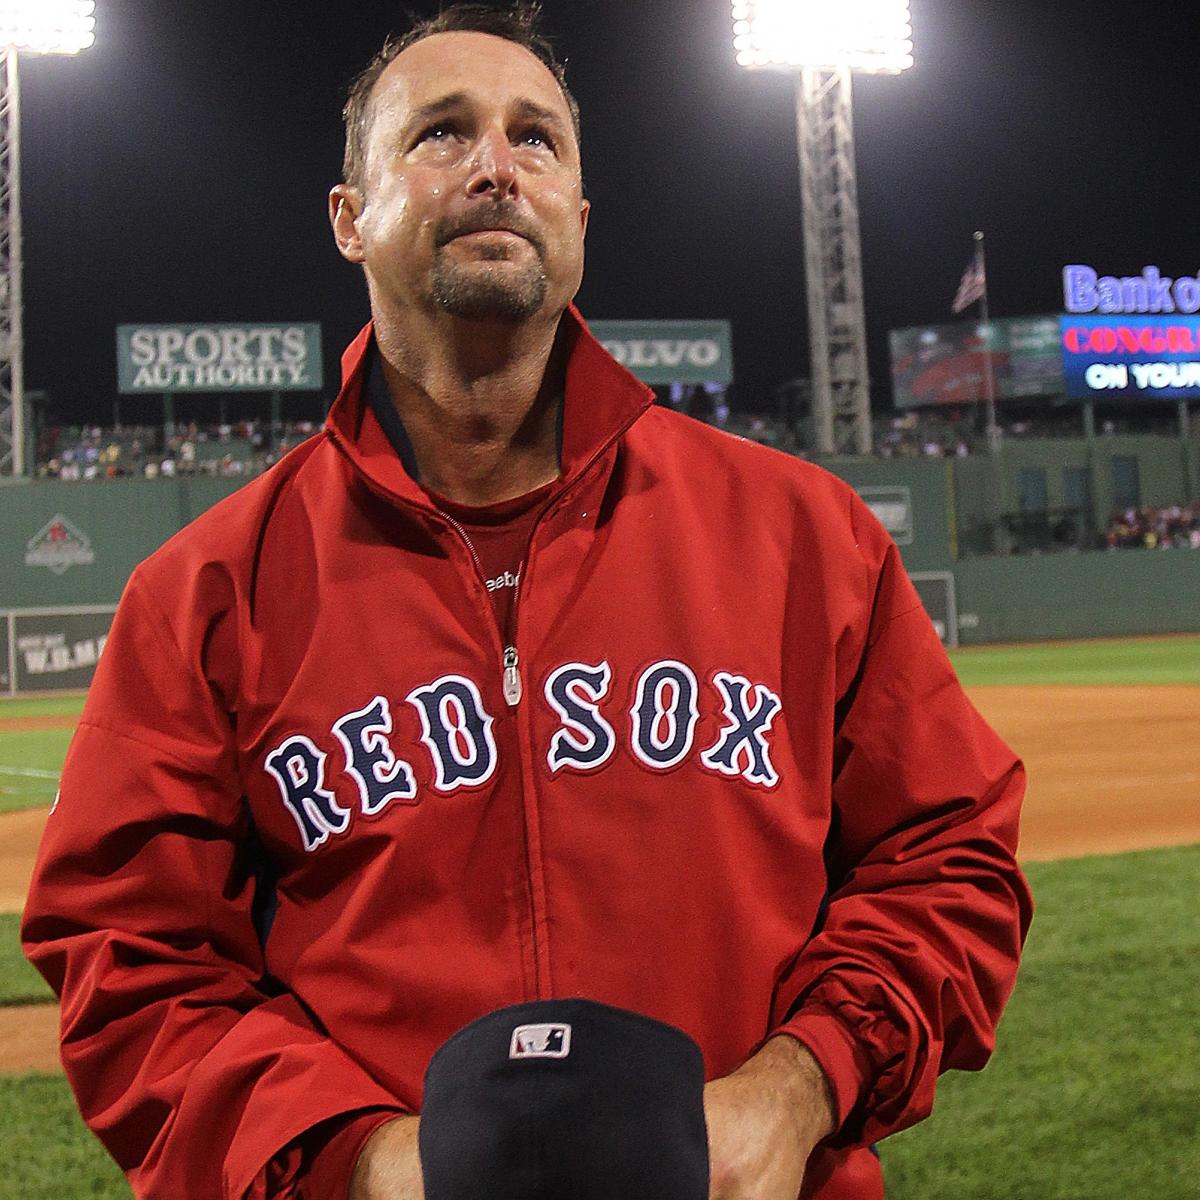 Tim Wakefield, who revived his career and Red Sox trophy case with  knuckleball, has died at 57